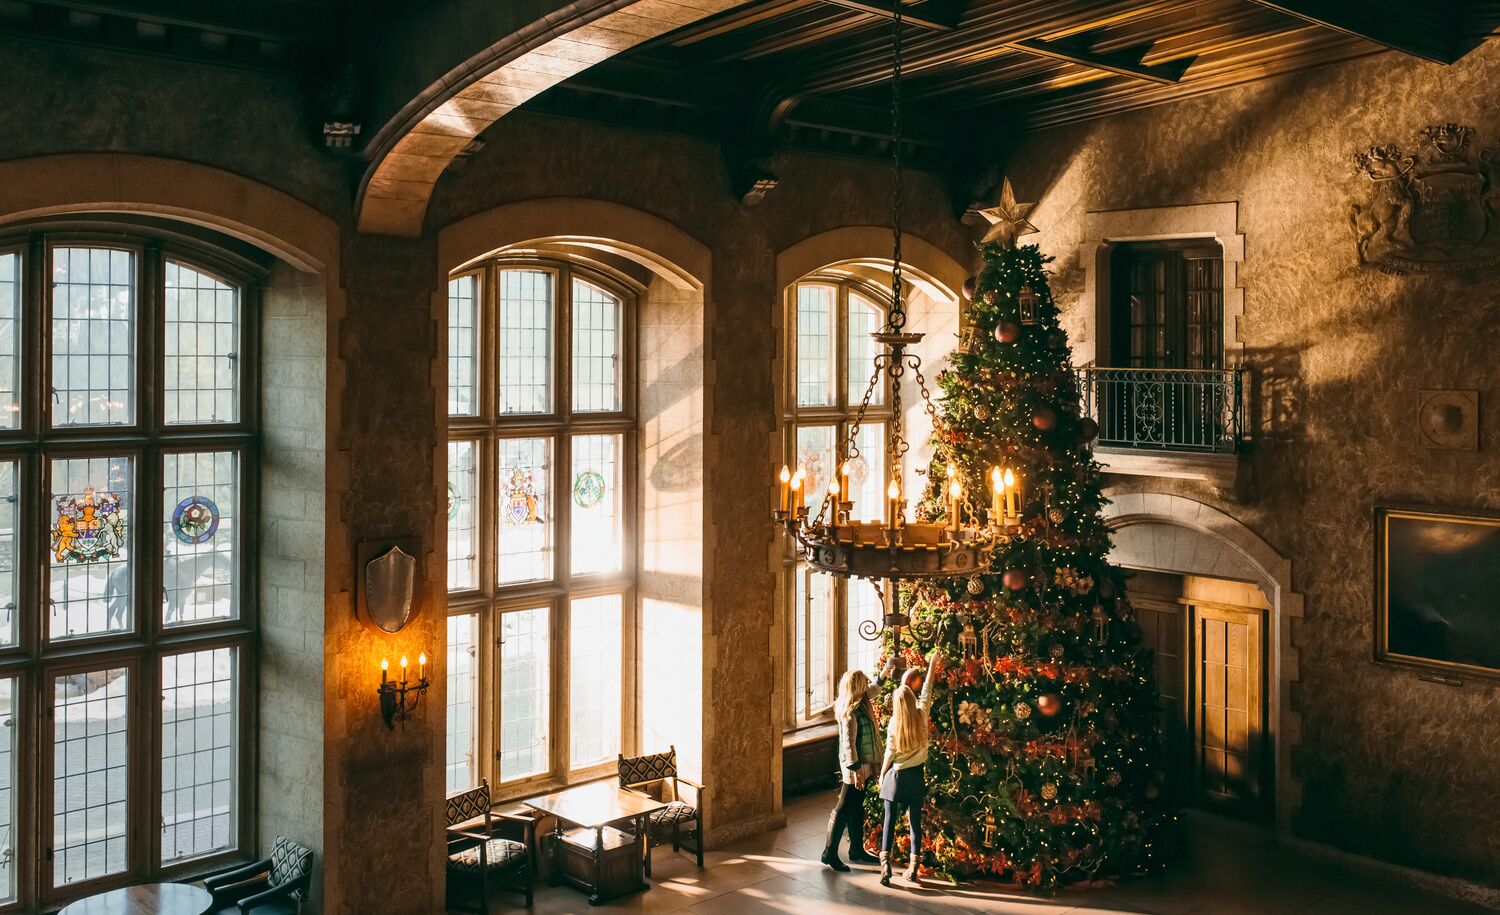 Two people and a giant Christmas tree at the Fairmont Banff Springs hotel in Banff National Park.